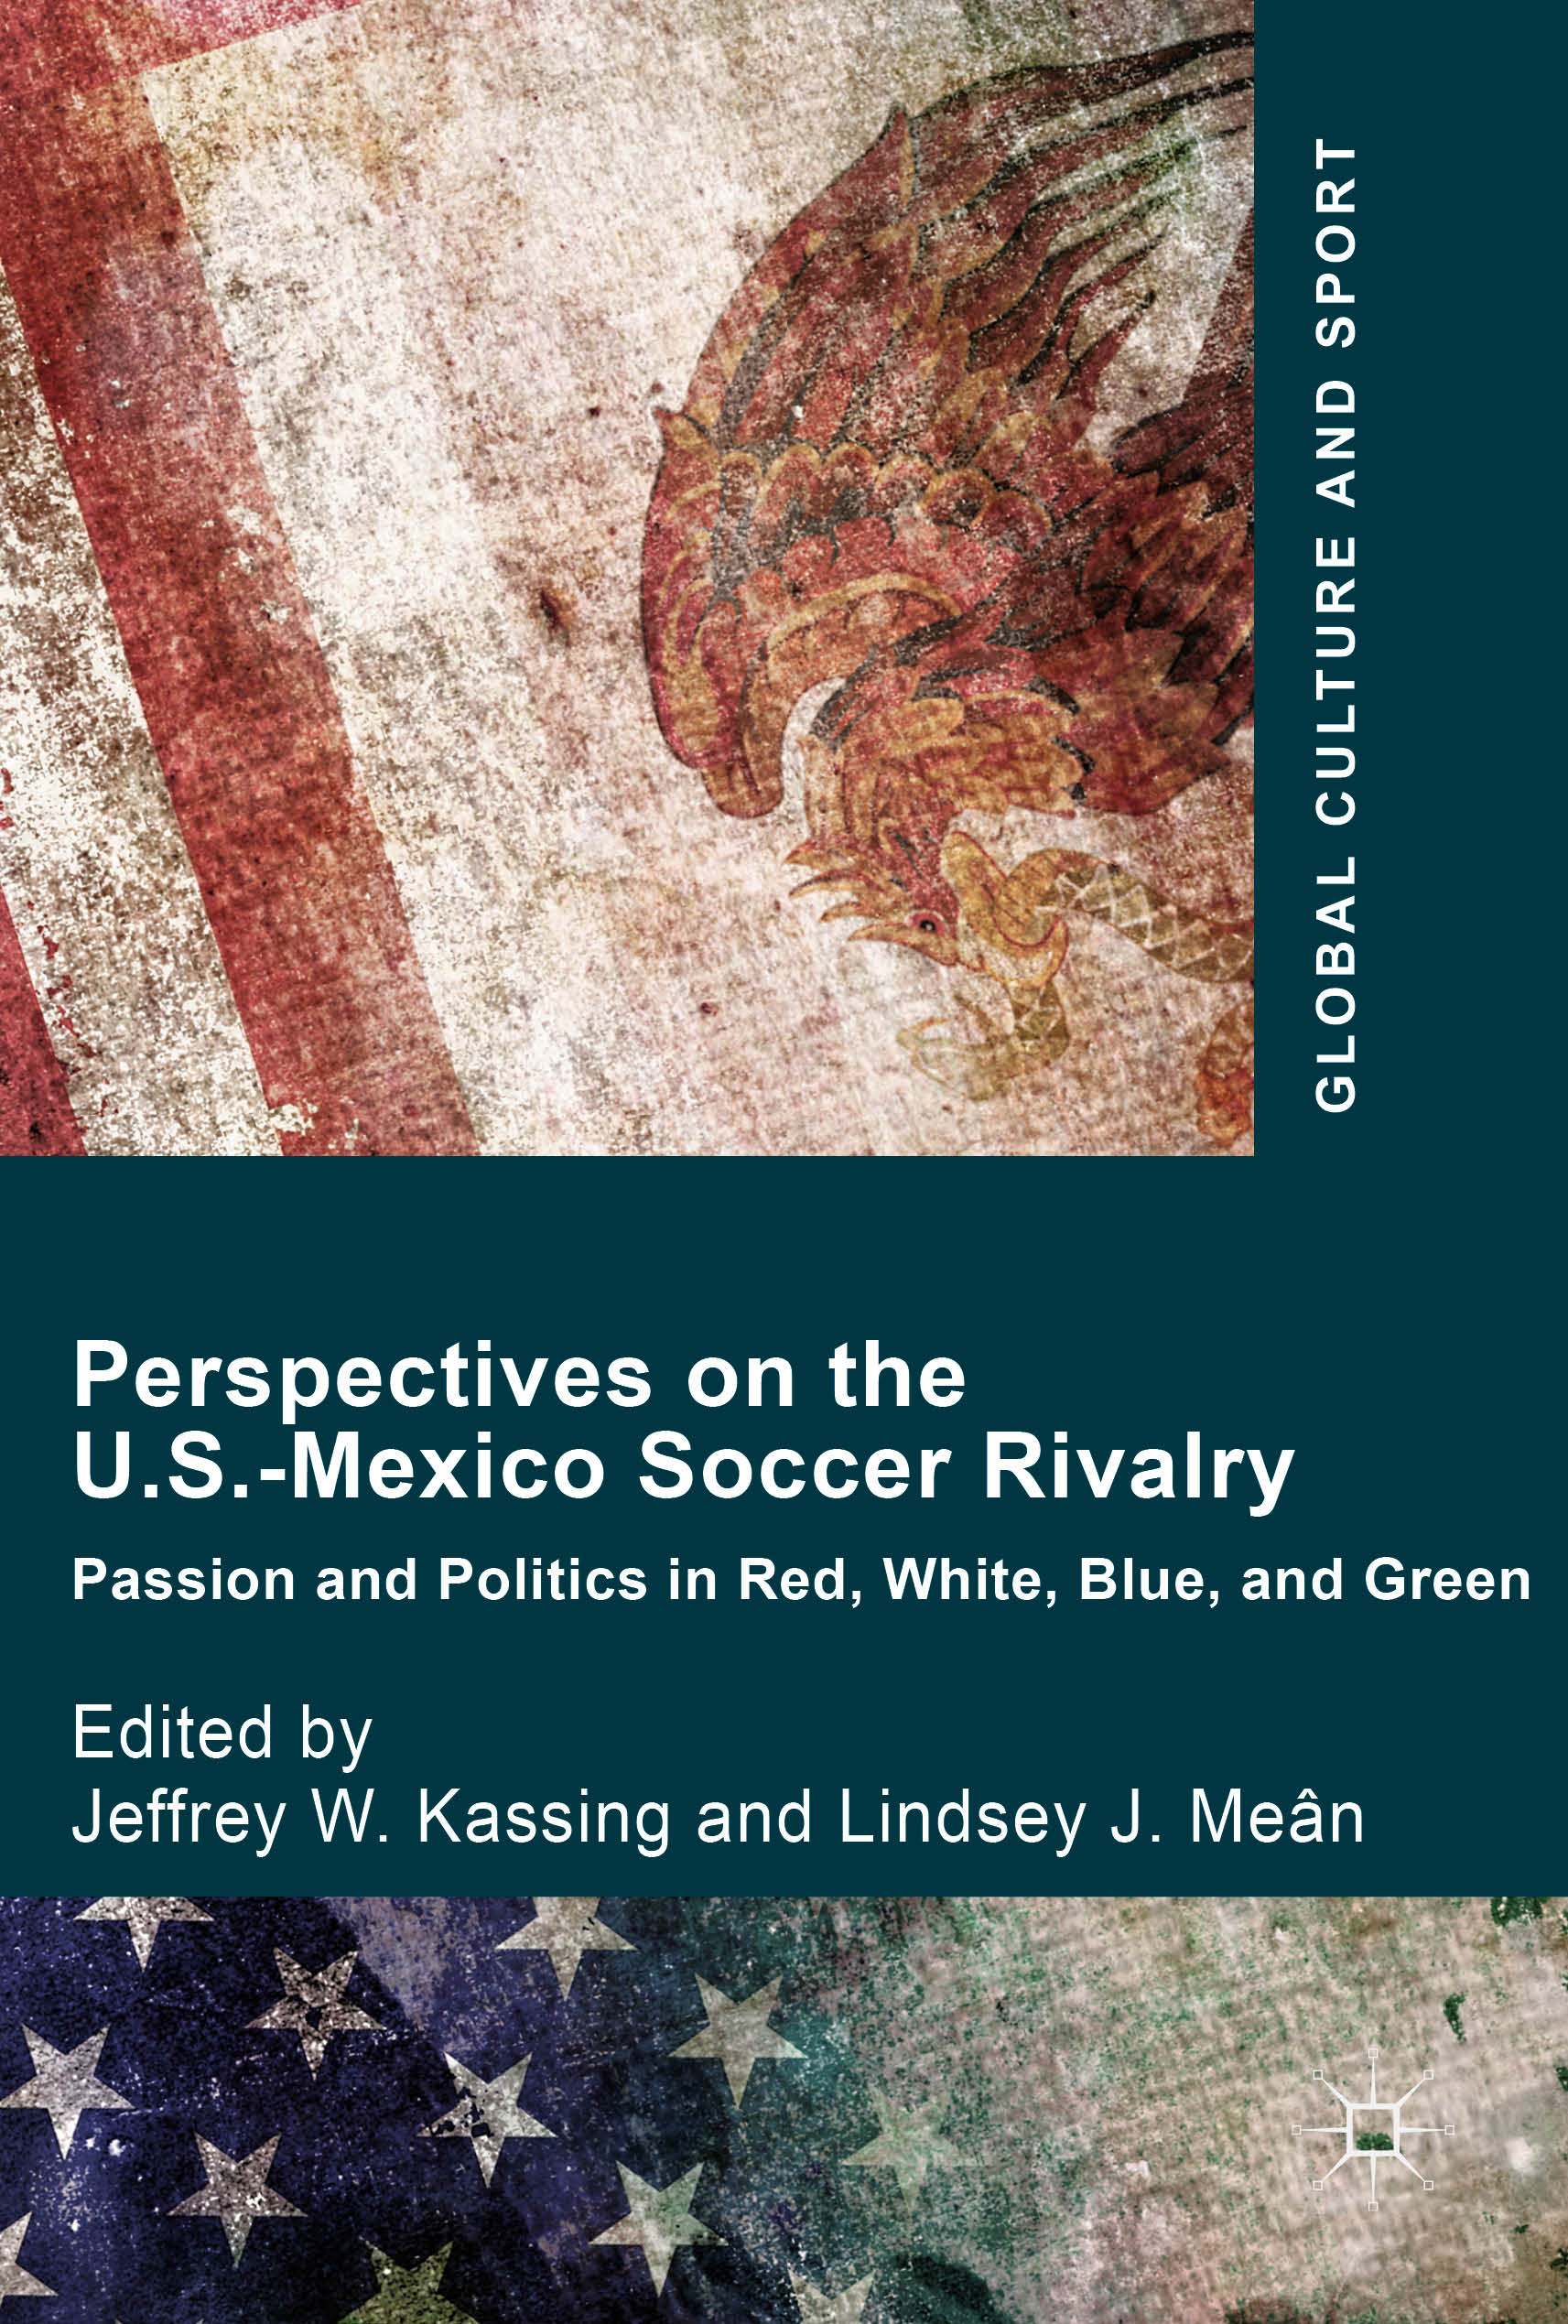 Perspectives on the U.S.-Mexico Soccer Rivalry: Passion and Politics in Red, White, Blue and Green